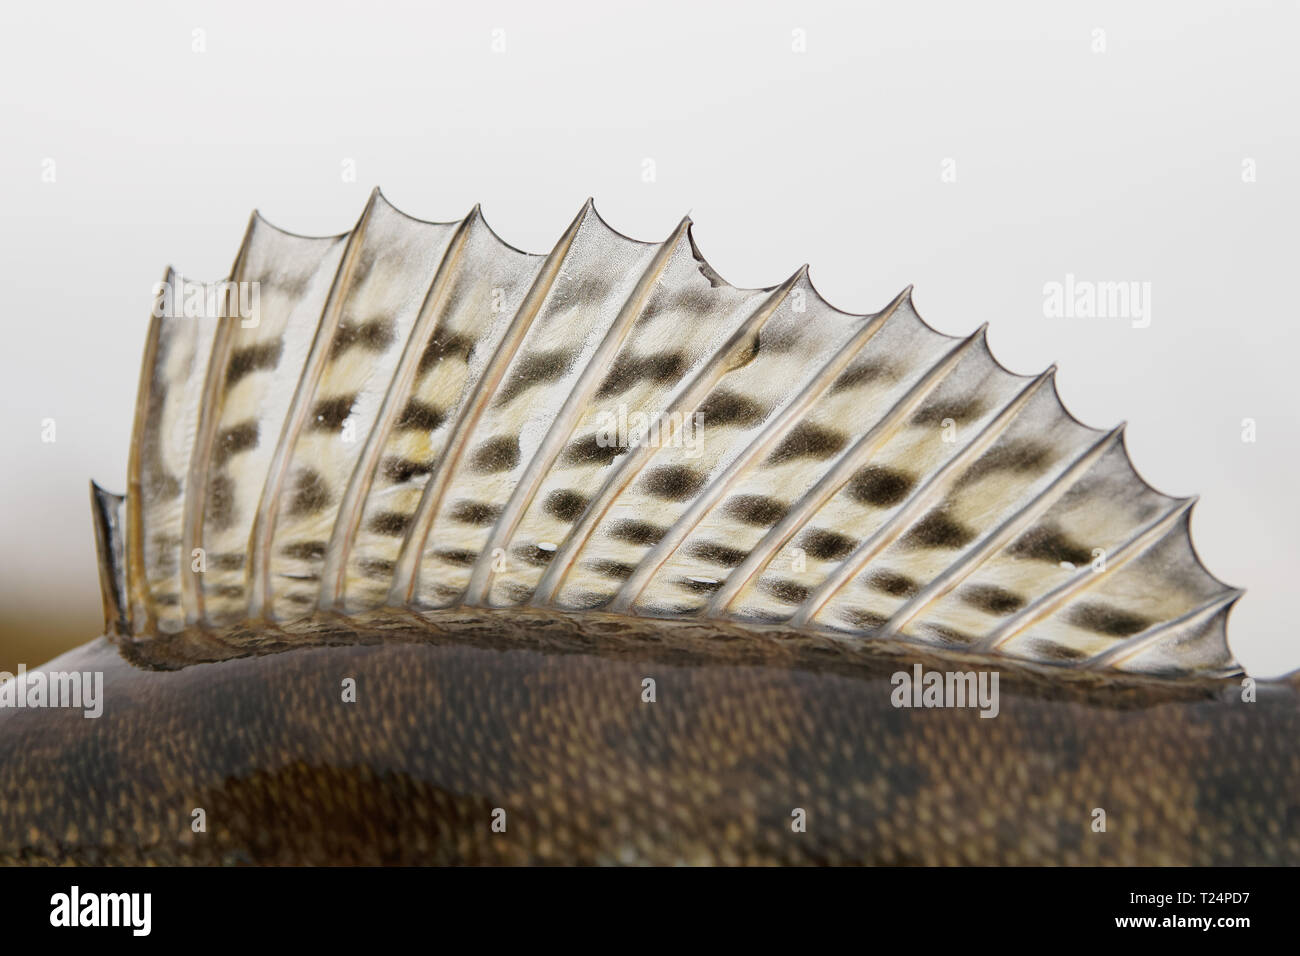 Dorsal fin of a walleye (pike-perch) close-up Stock Photo